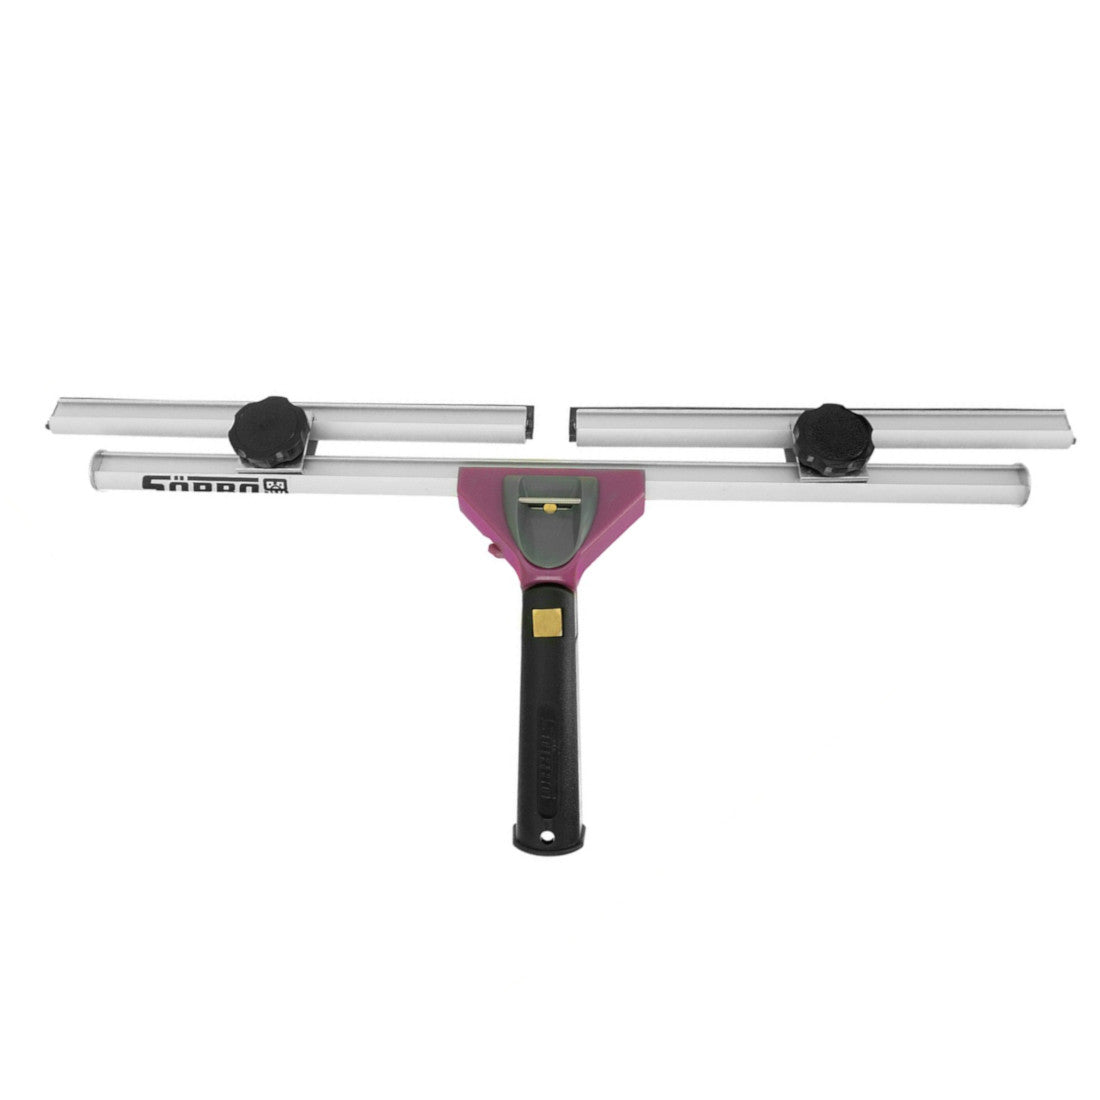 Swivel Squeegee + 18' Extension Pole